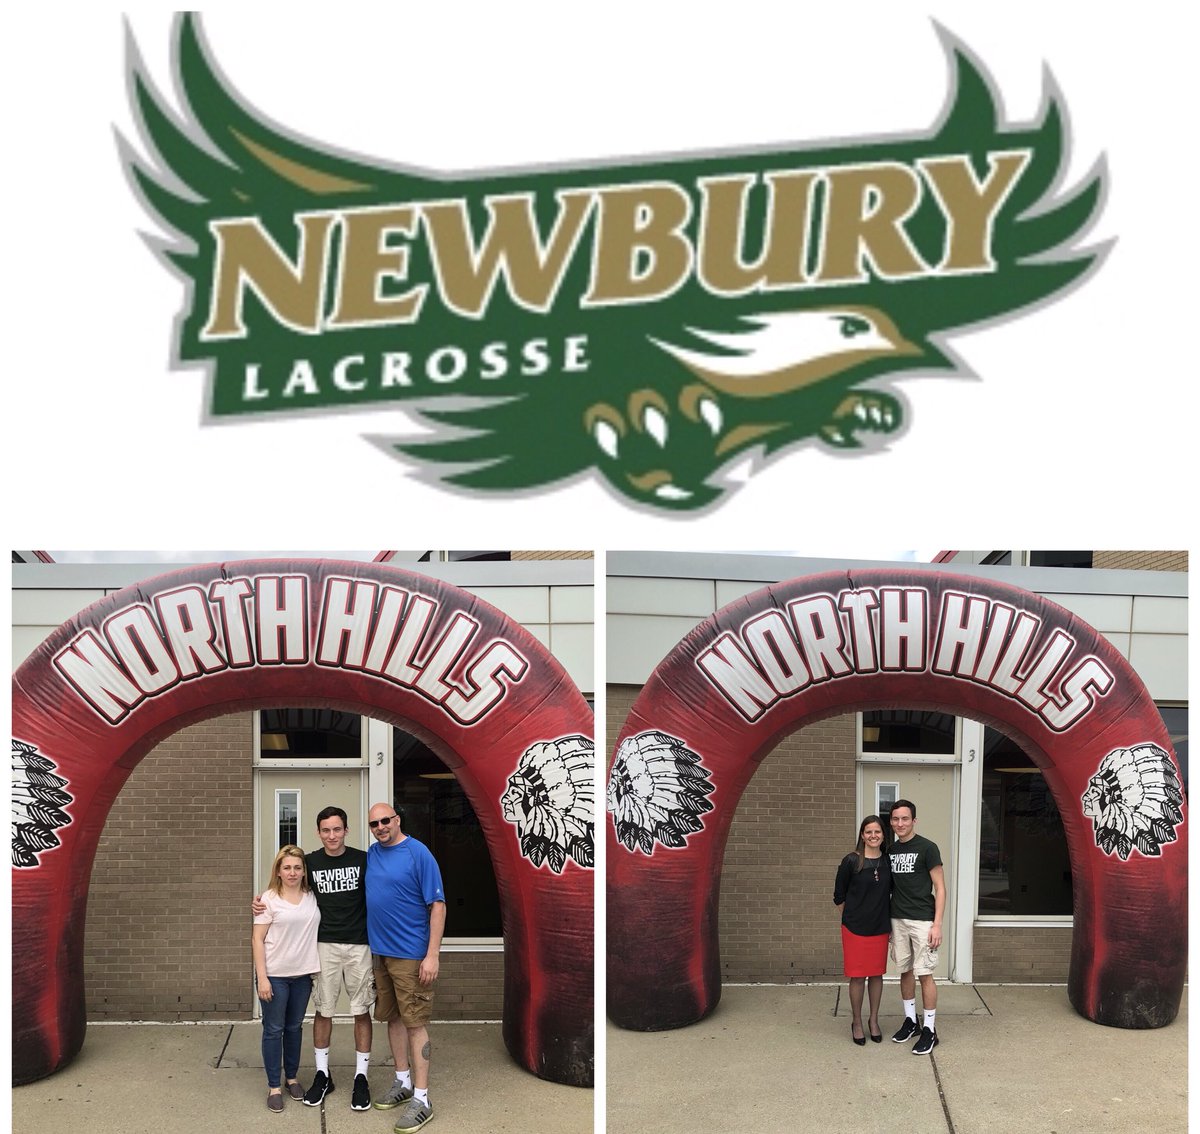 Welcome to the @NCNighthawkNews Family @connorzombee34 @NorthHillsLax Looking forward to doing great things together @NewburyColl 🦅 

#Newbury22 #Lacrosse #LAX  #NighthawkNation #NCAALAX